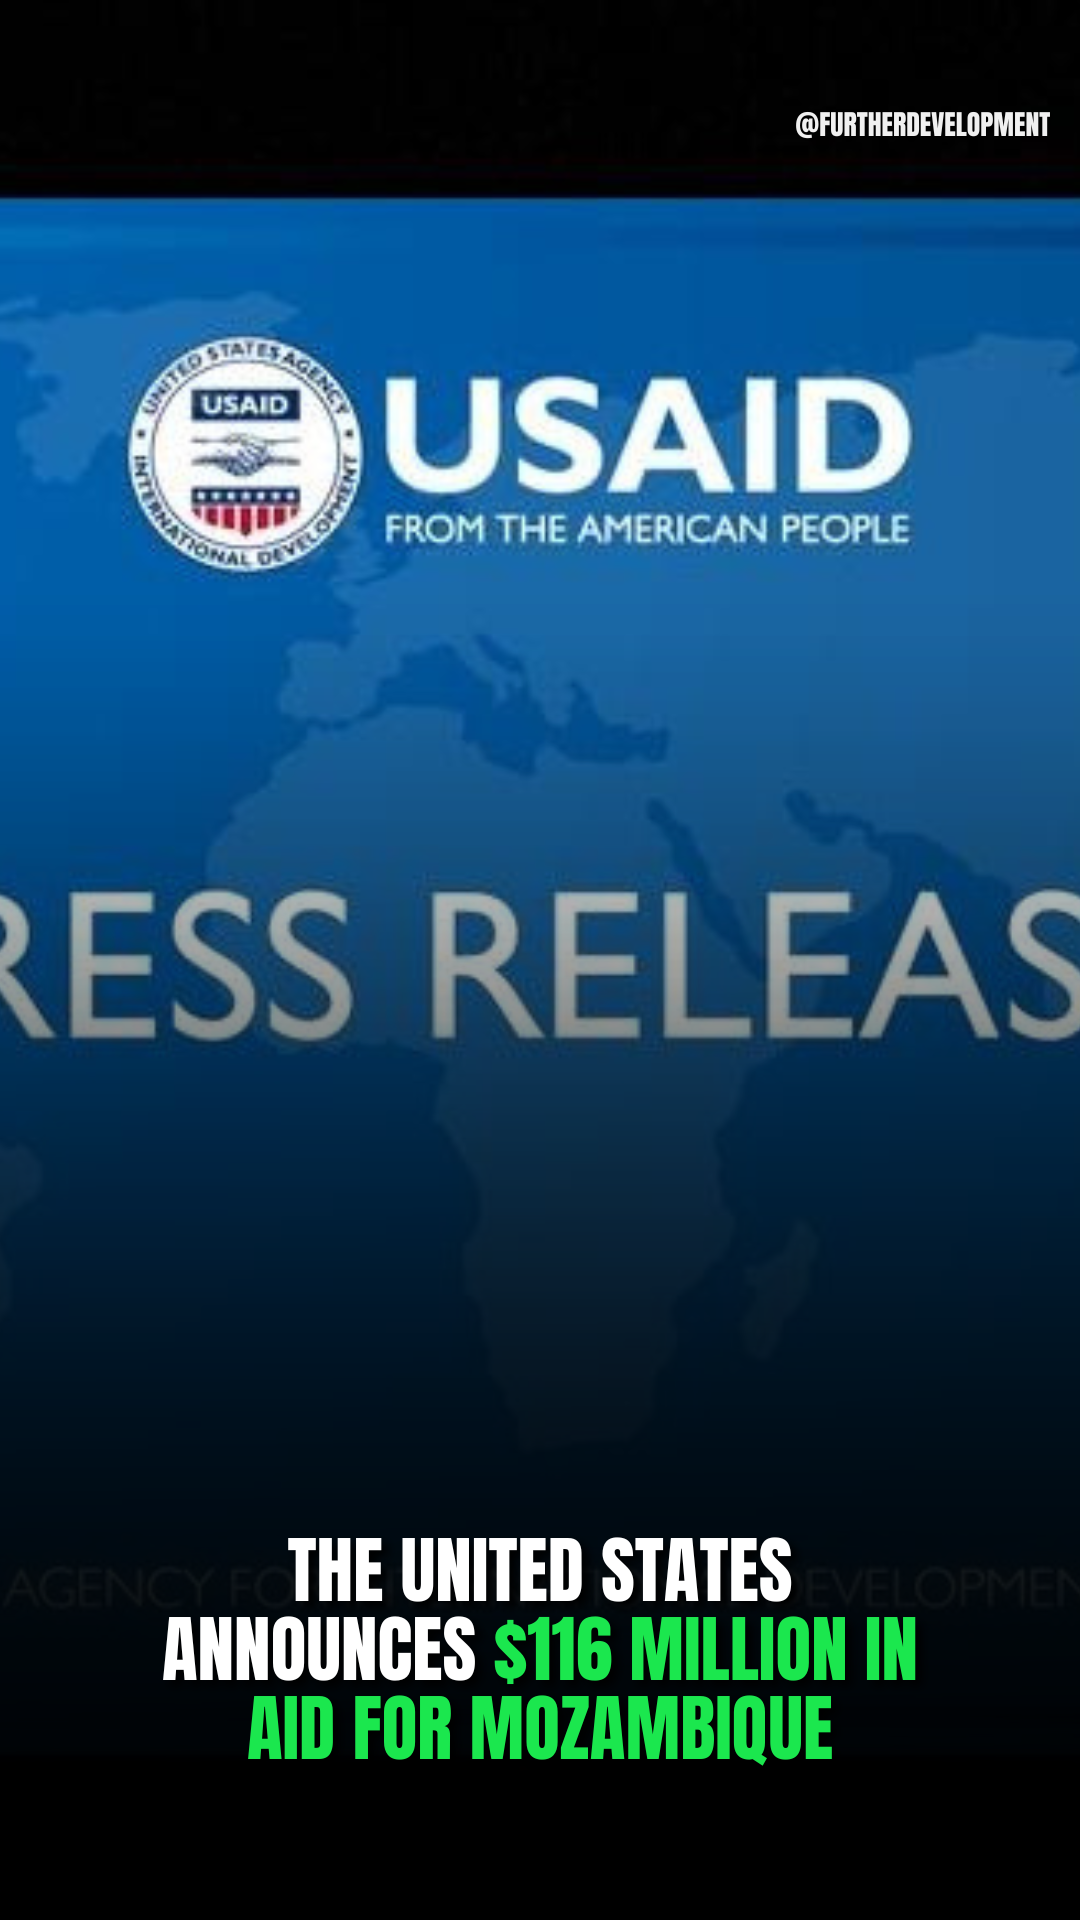 The United States announces $116 million in aid for Mozambique